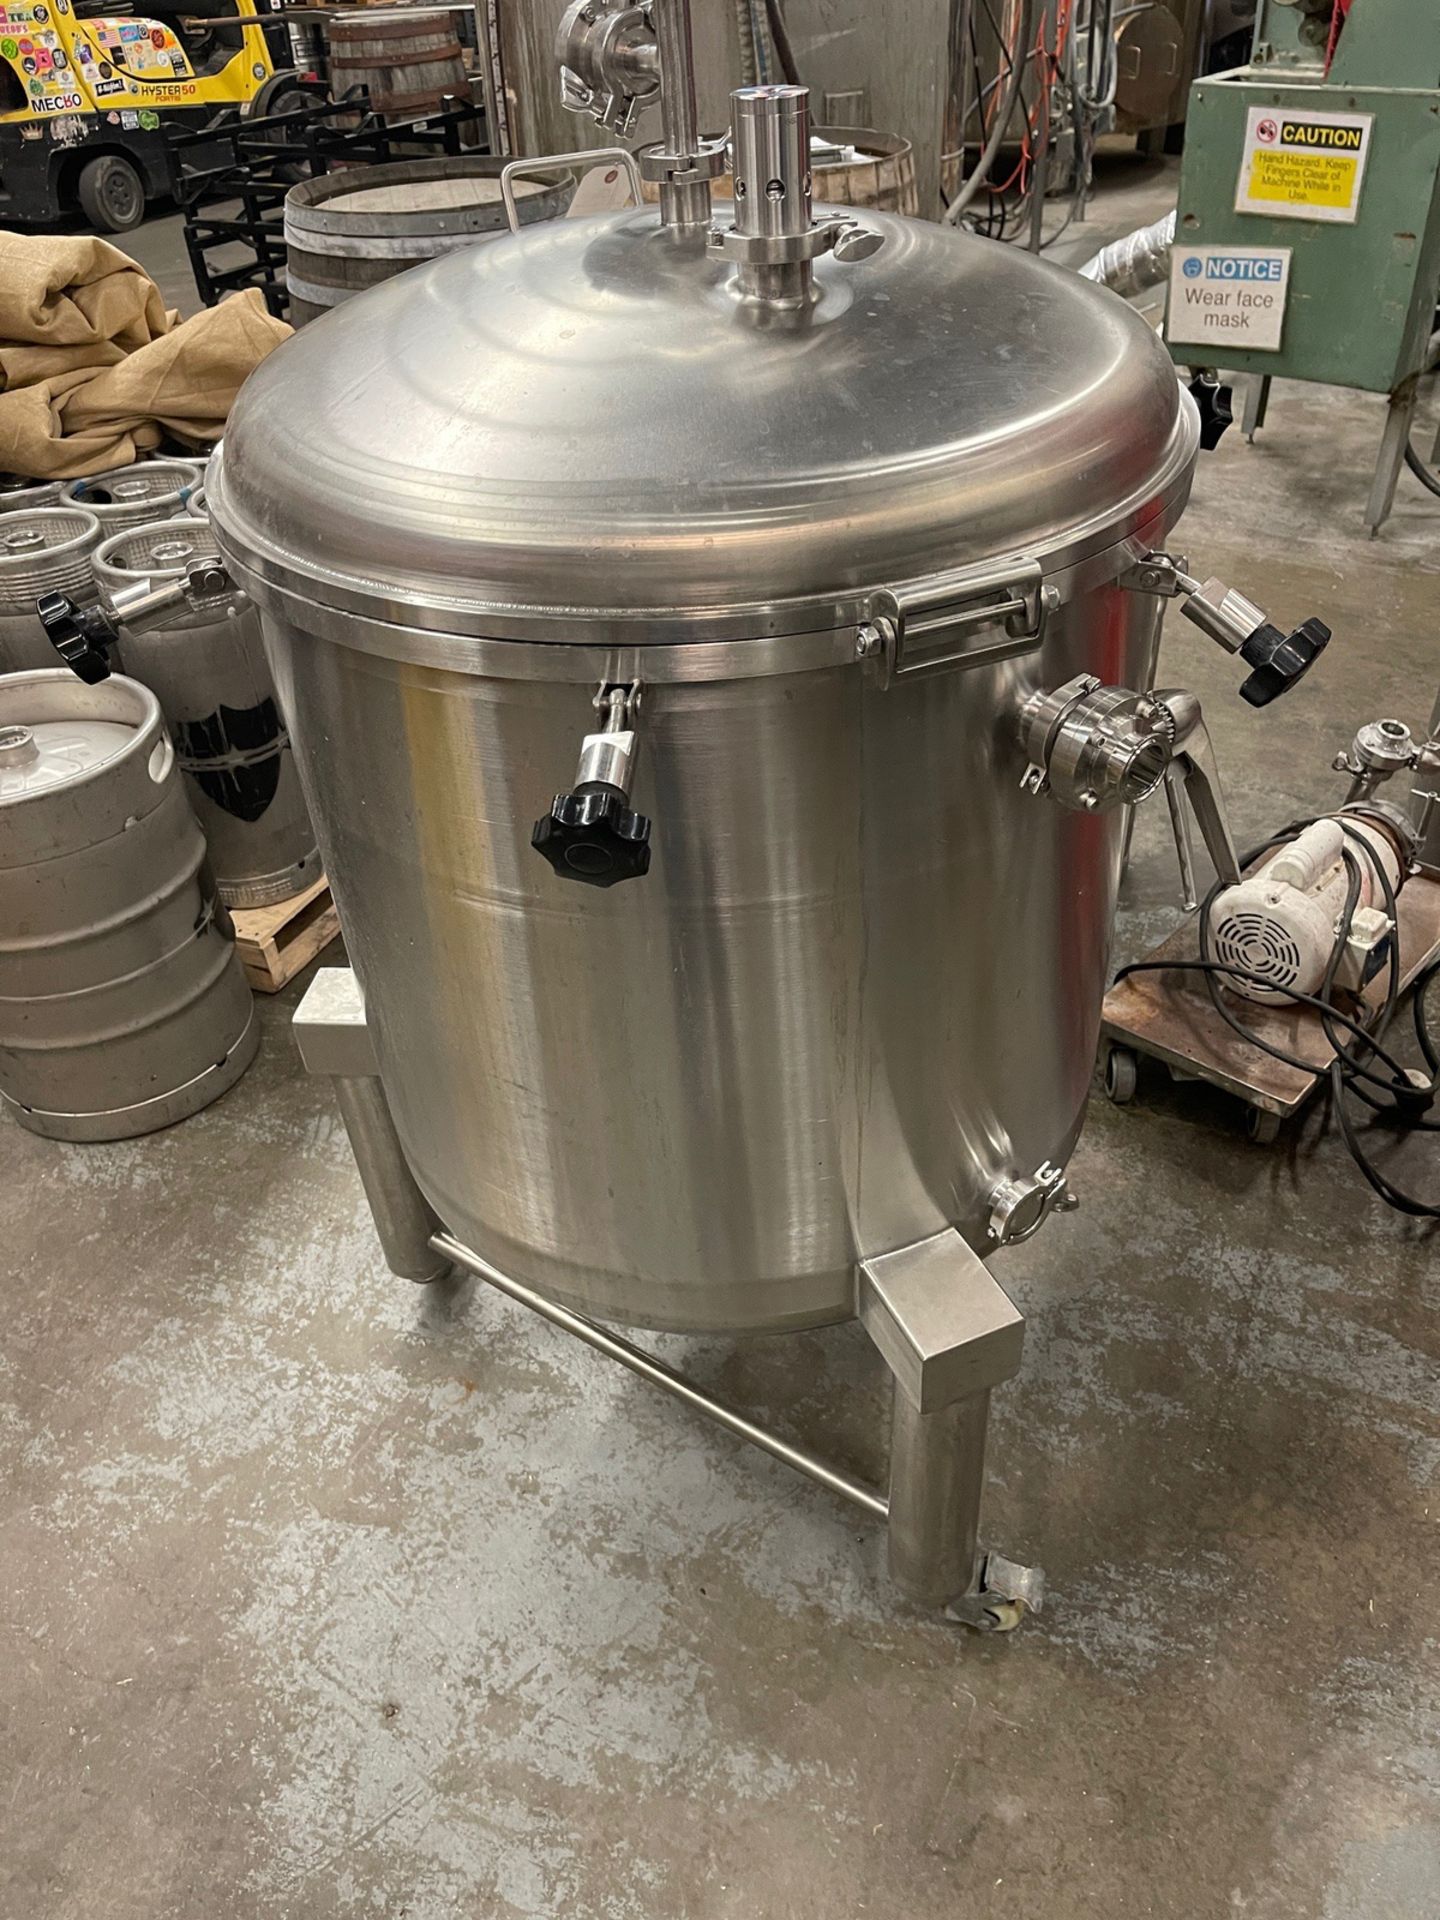 2018 ABS Commercial 3 BBL Hop Dosing Tank | Rig Fee $250 - Image 2 of 3